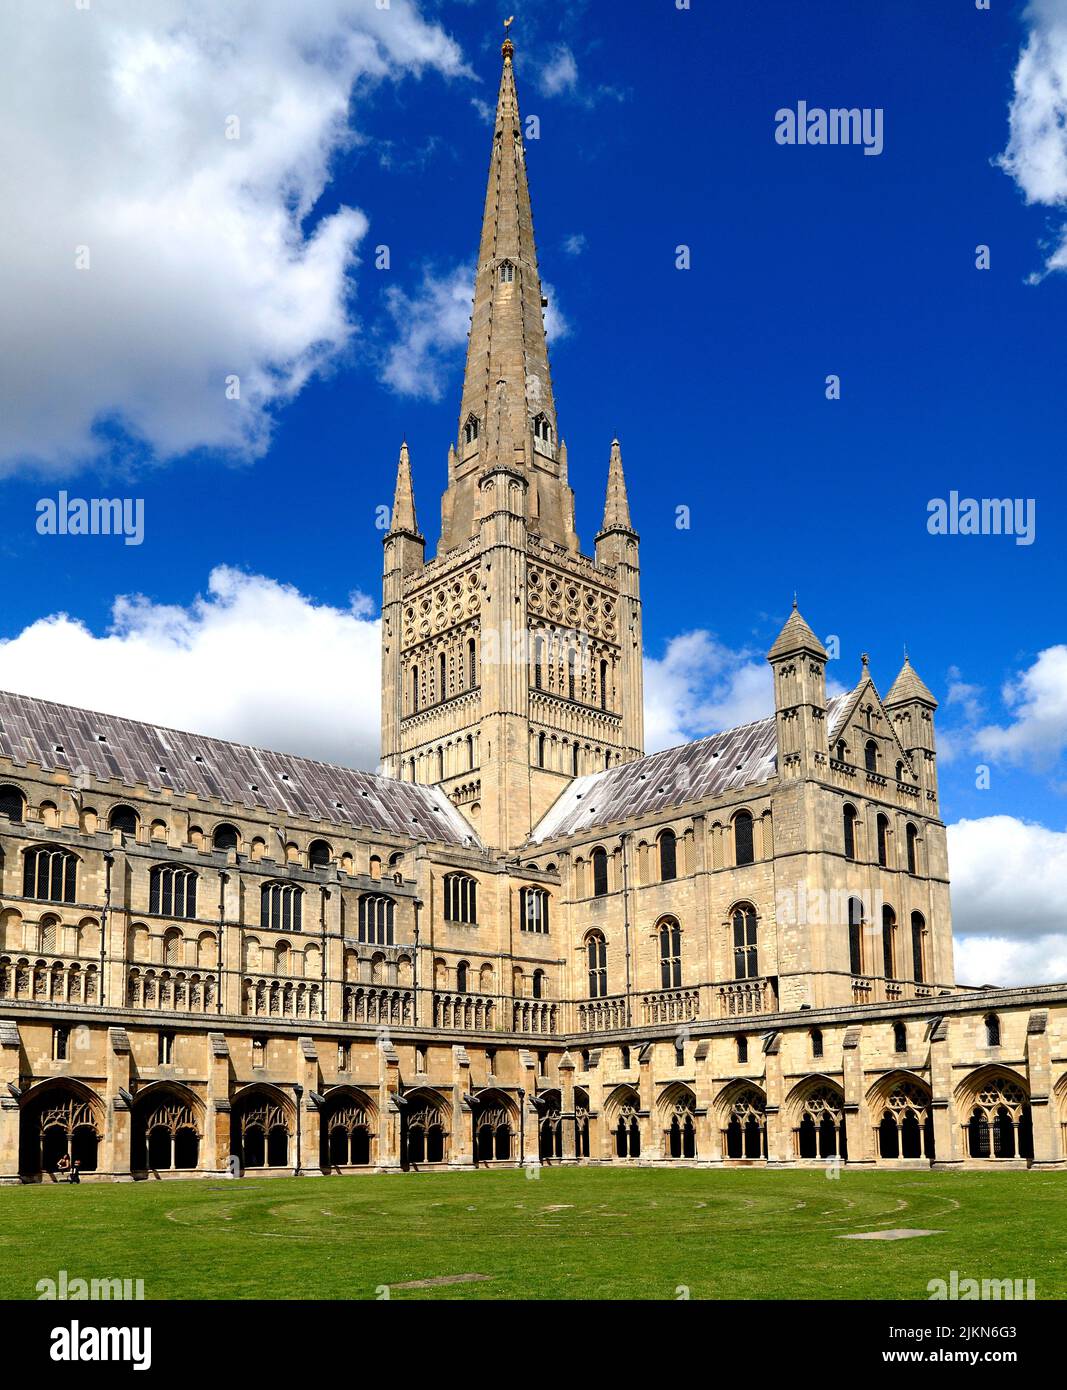 Norwich Cathedral,  Spire , Nave, Transept and Cloisters, medieval architecture, cathedrals, Norfolk, England, UK Stock Photo